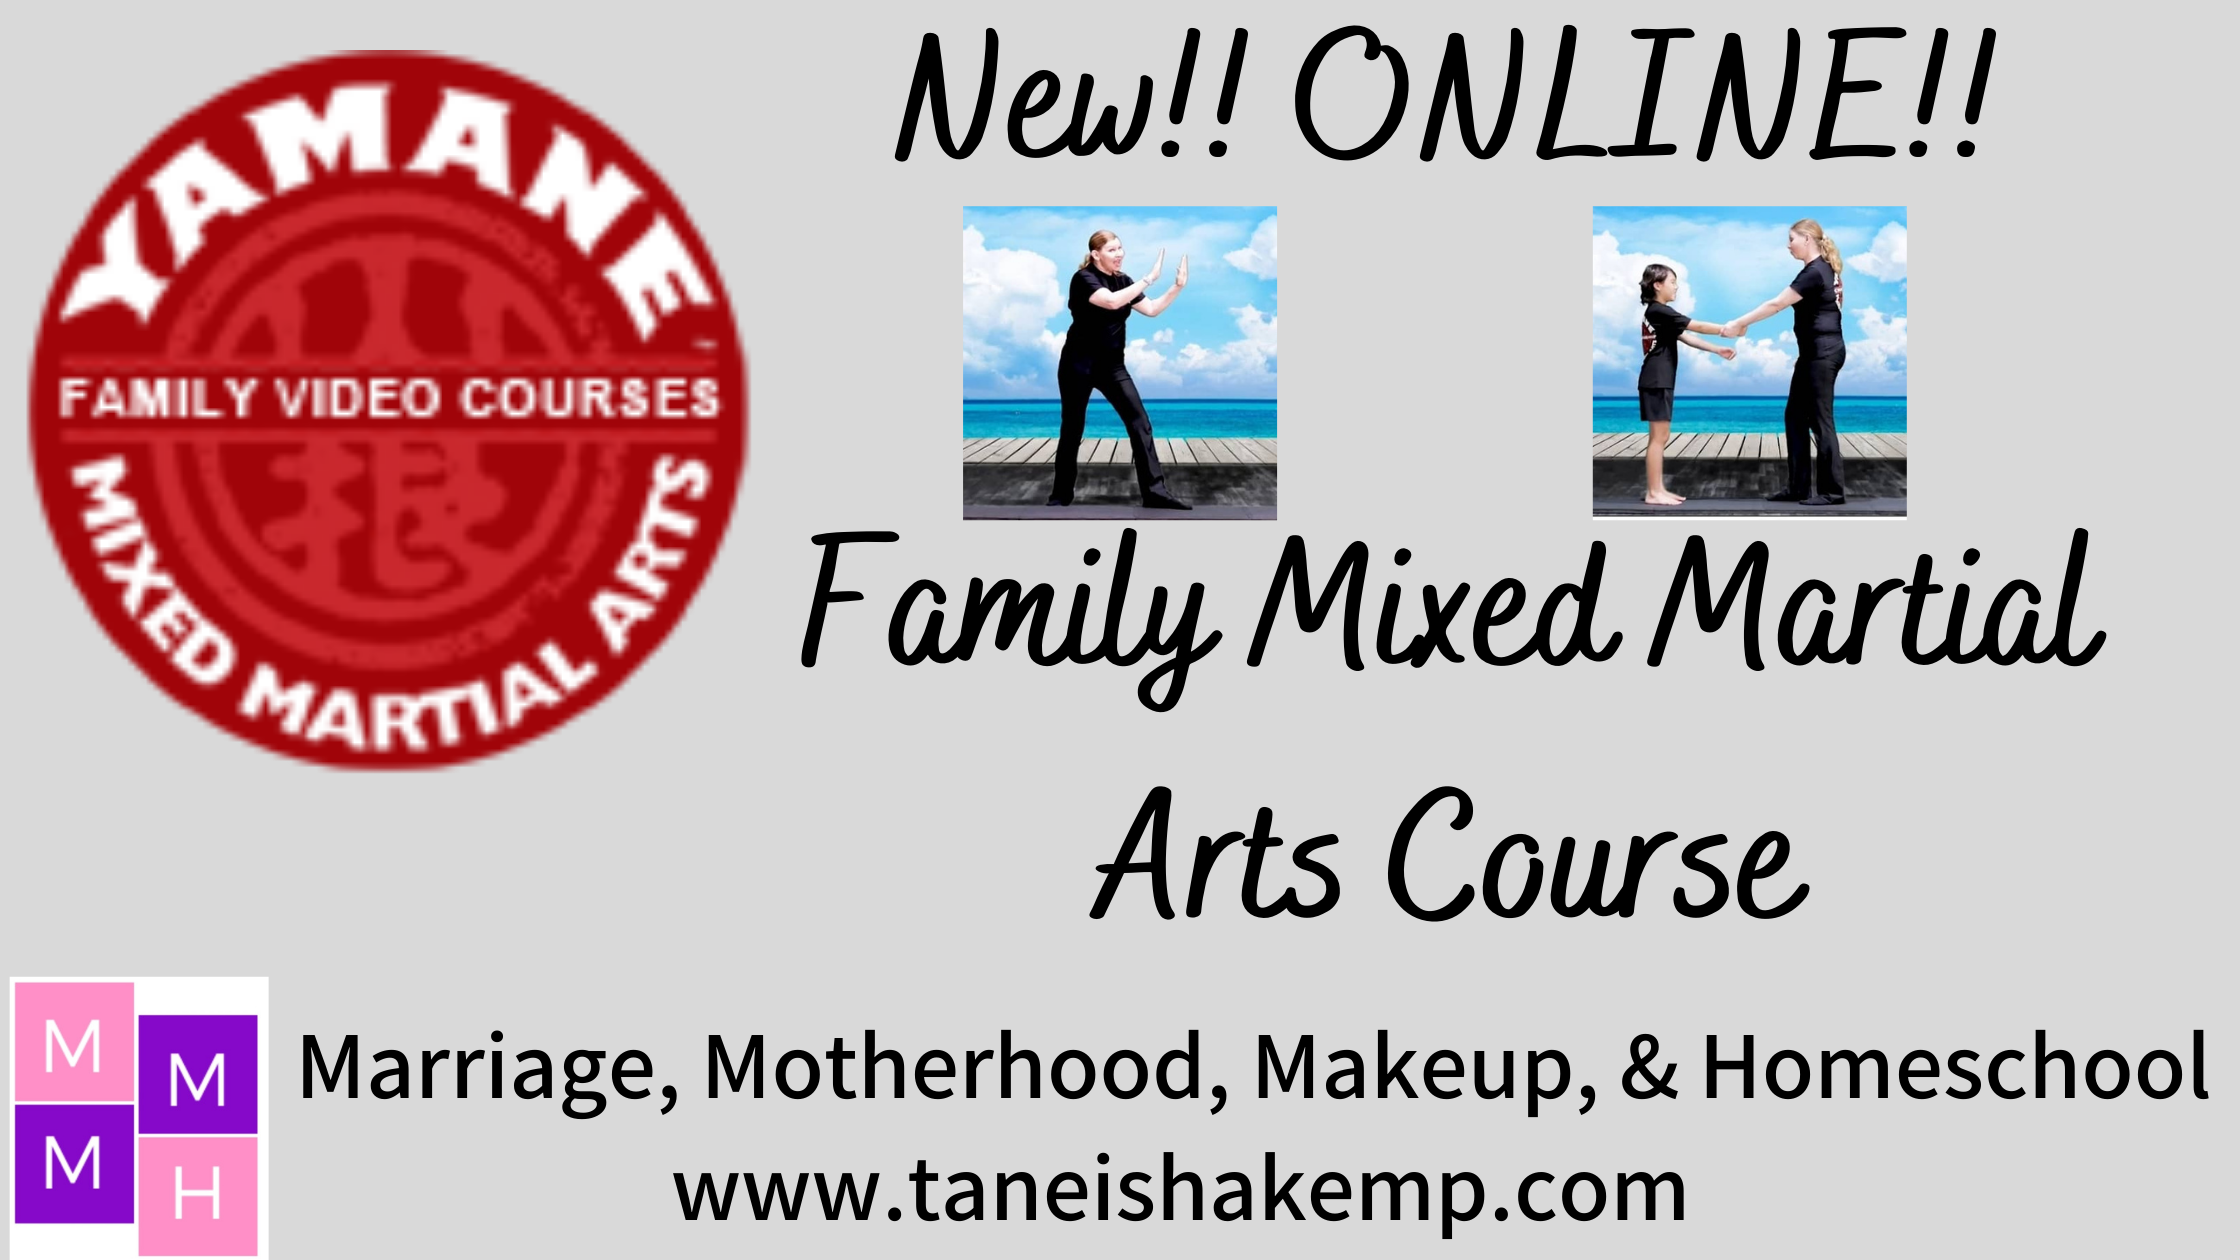 New!! ONLINE!! Family Mixed Martial Arts Course